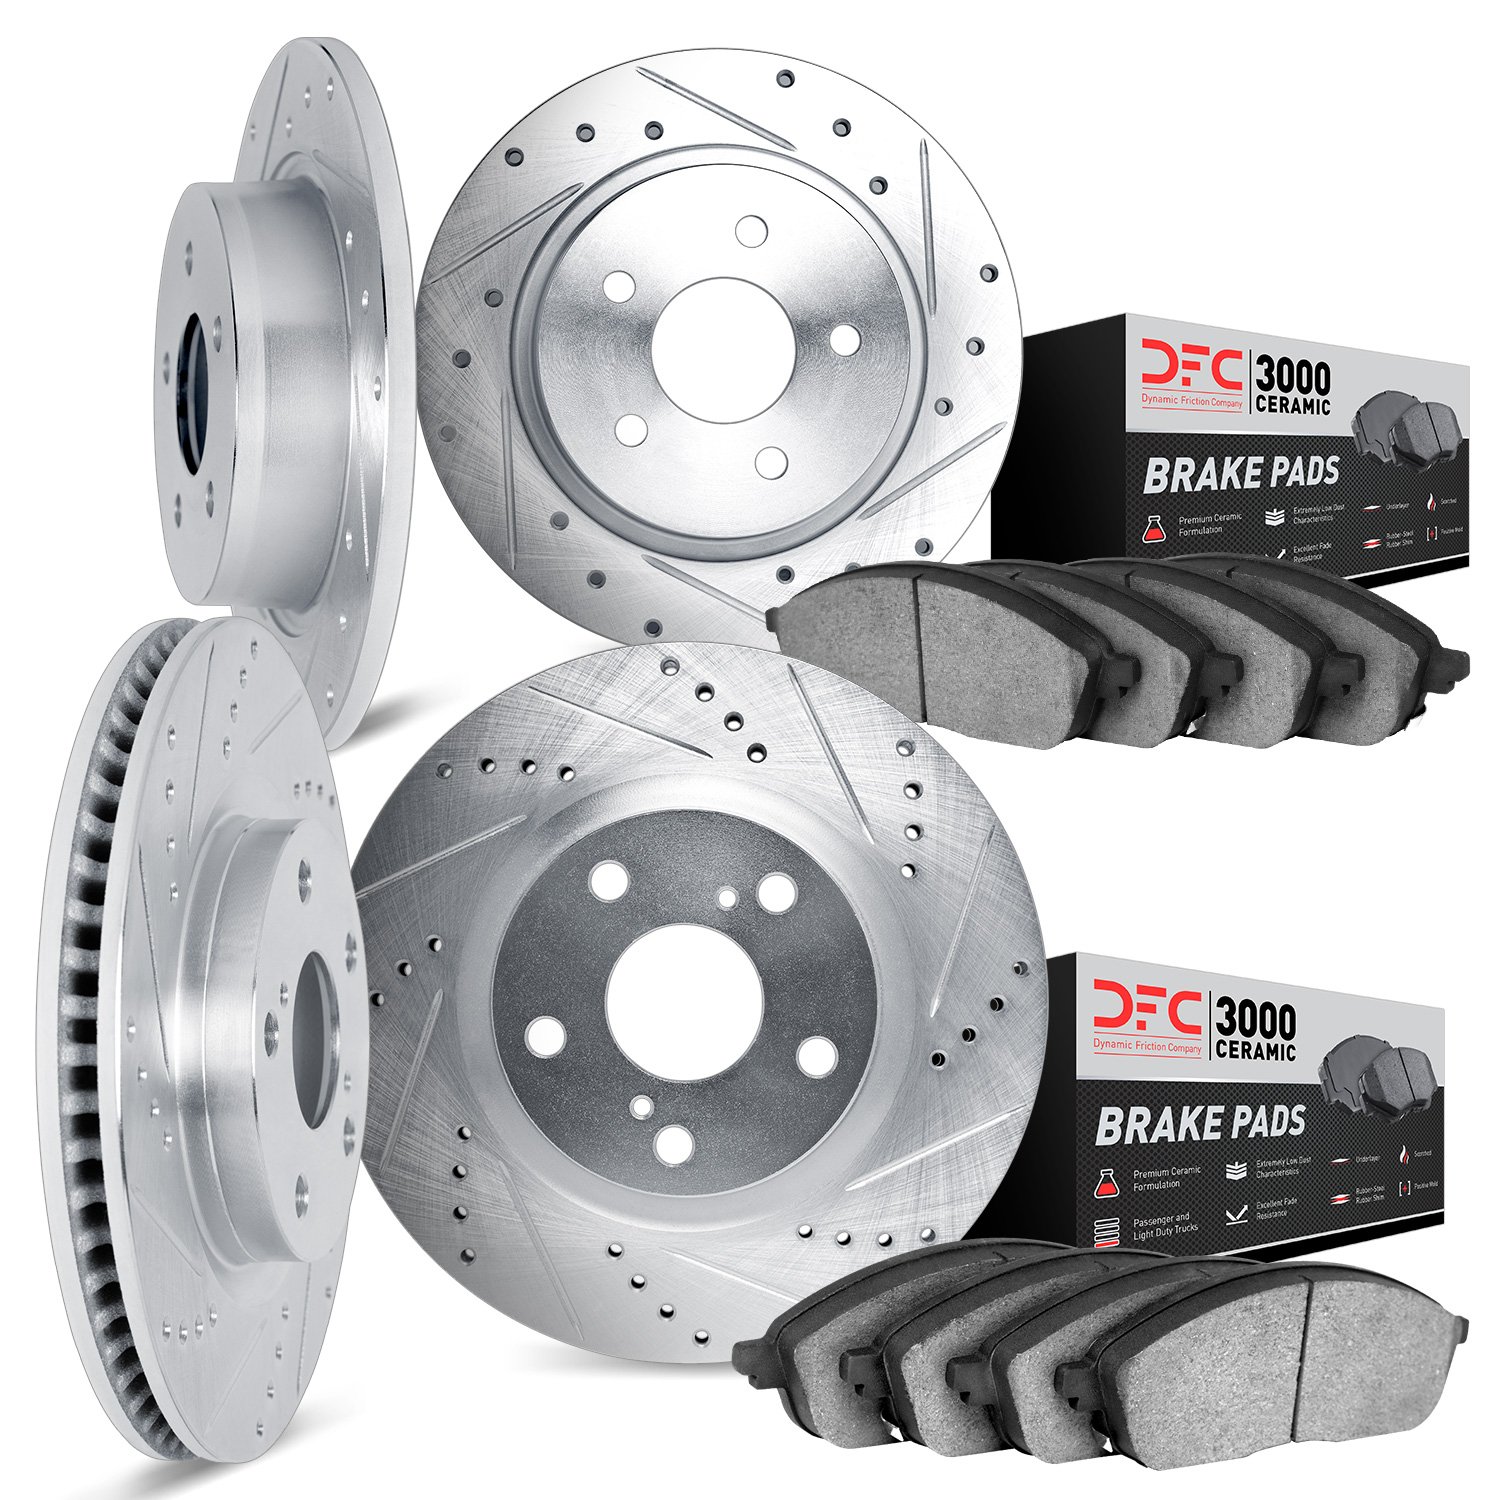 7304-80021 Drilled/Slotted Brake Rotor with 3000-Series Ceramic Brake Pads Kit [Silver], 1998-2002 Ford/Lincoln/Mercury/Mazda, P